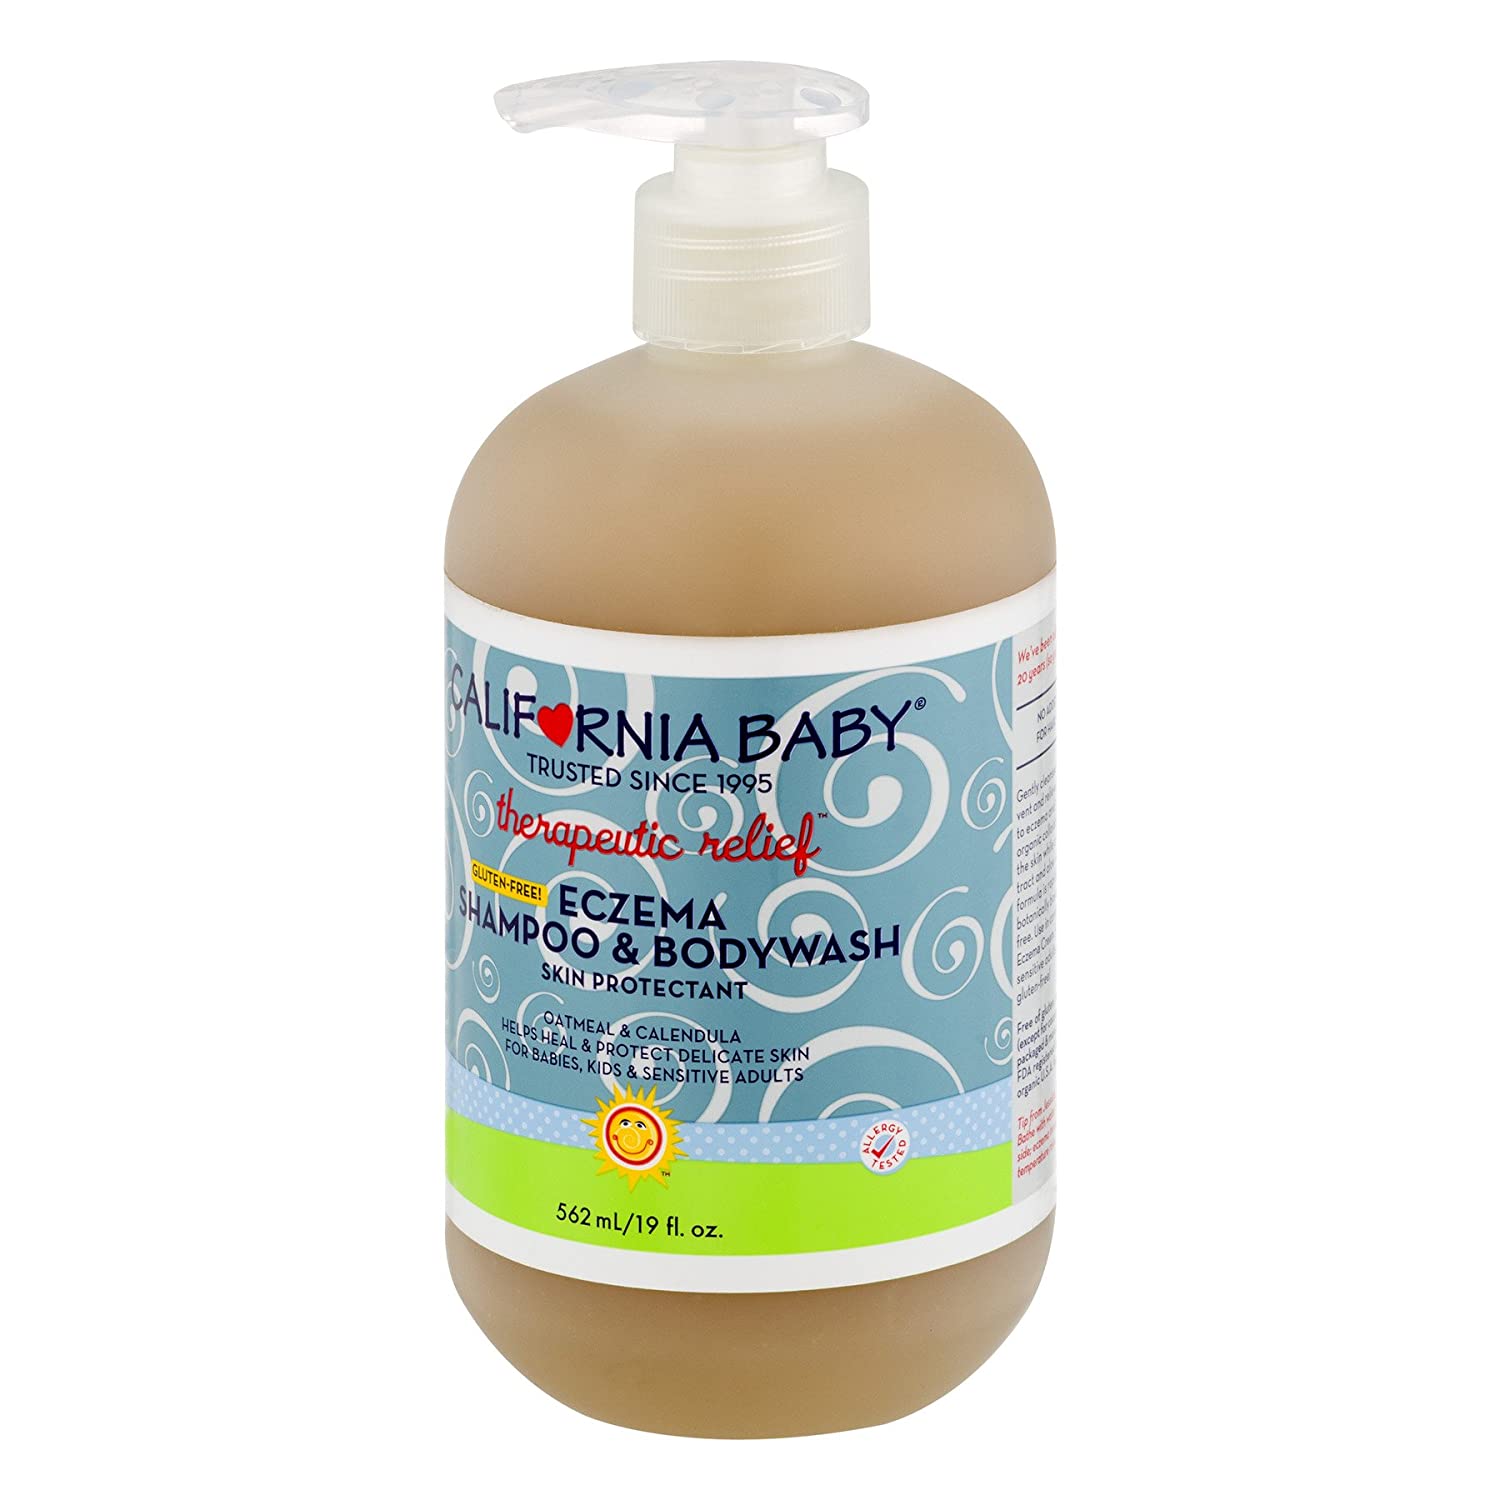 Top 5 Best Baby Shampoos for Eczema (2020 Review)